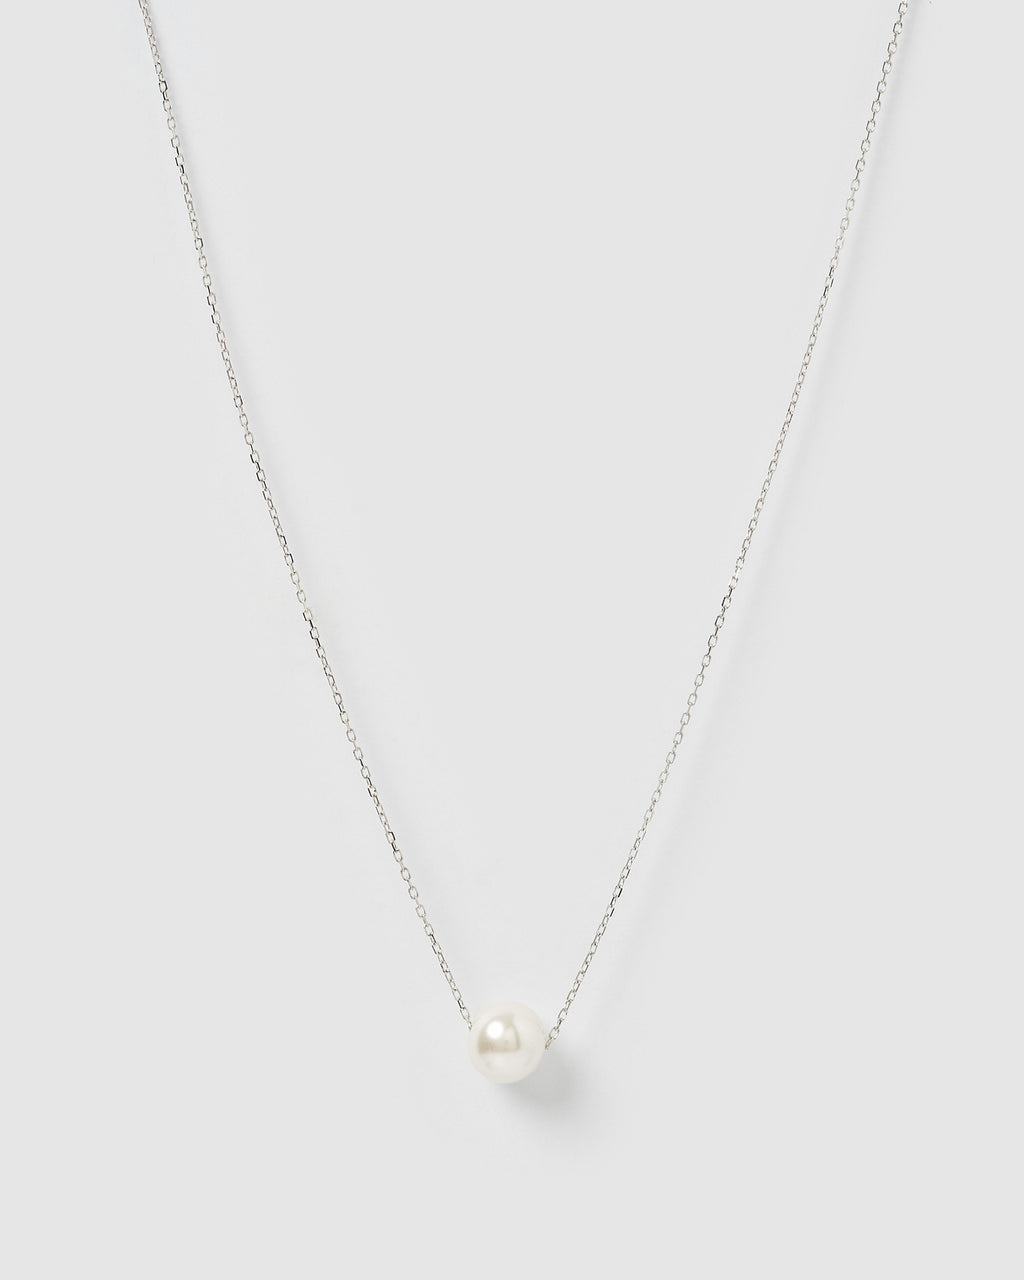 Izoa Delicate Freshwater Pearl Necklace Sterling Silver